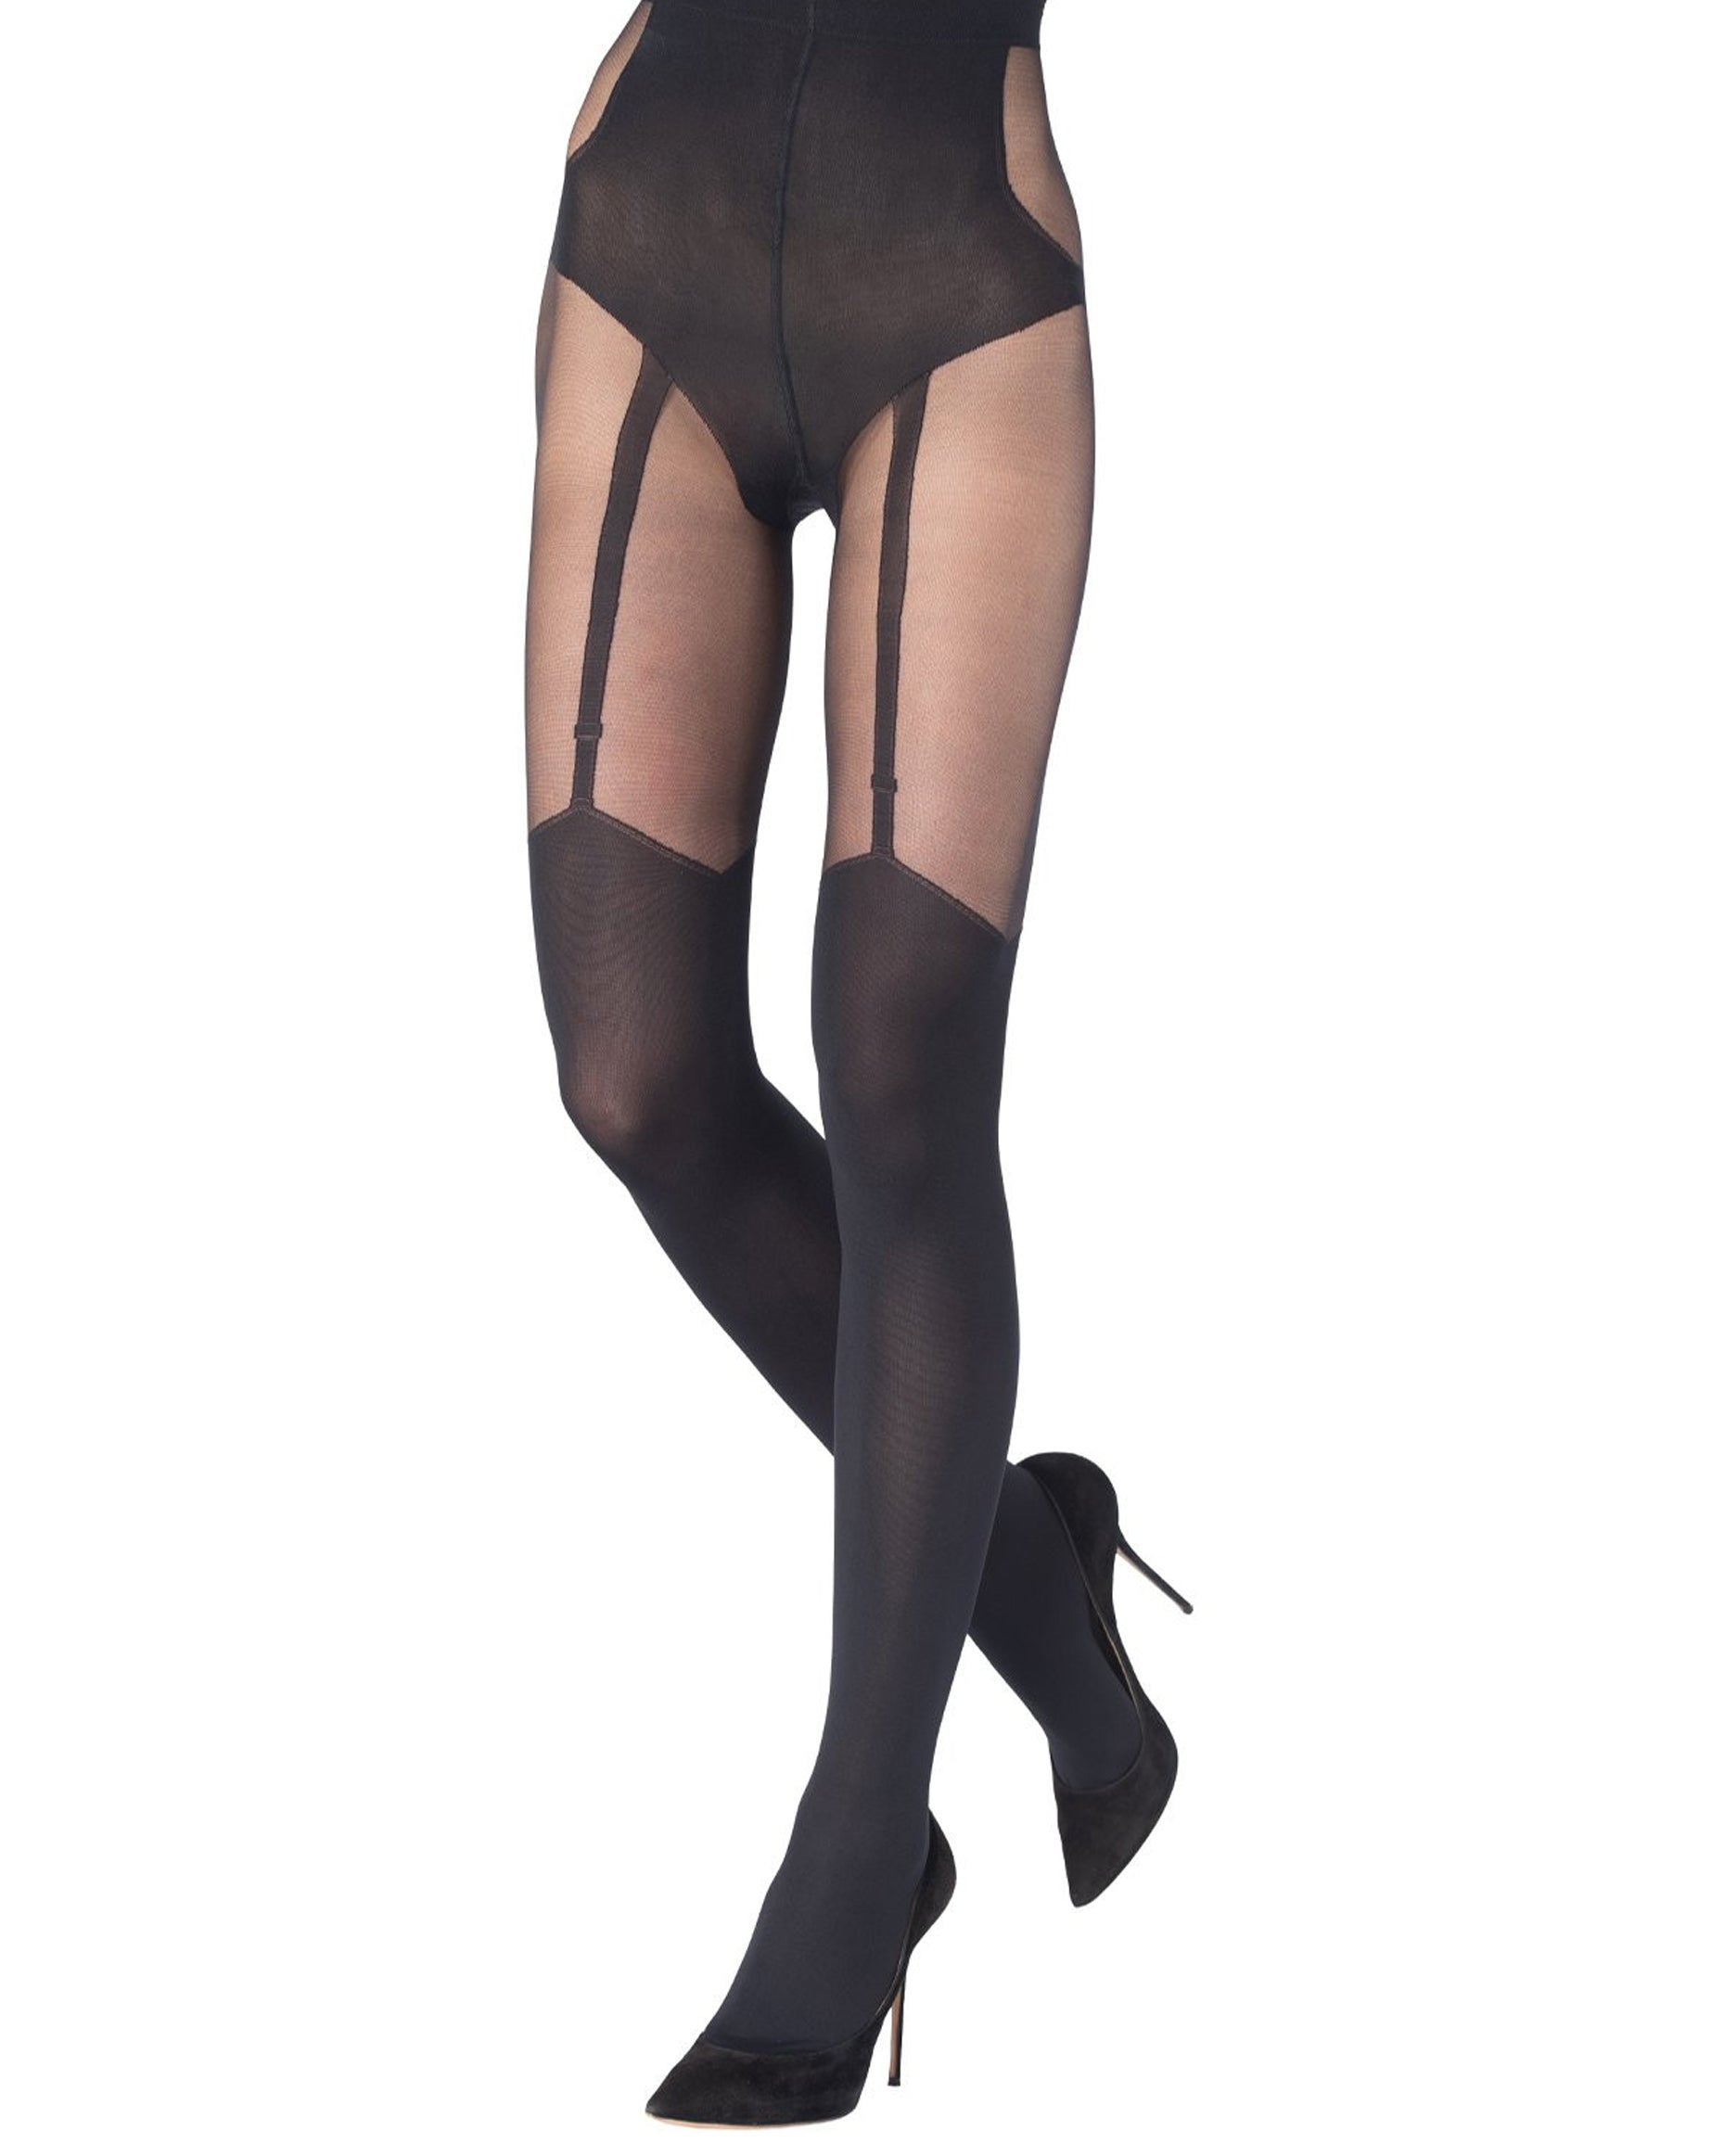 Emilio Cavallini Illusion Garter Tights - Sheer black fashion tights with an opaque faux over the knee stocking with suspender brief detail, flat seams and gusset.